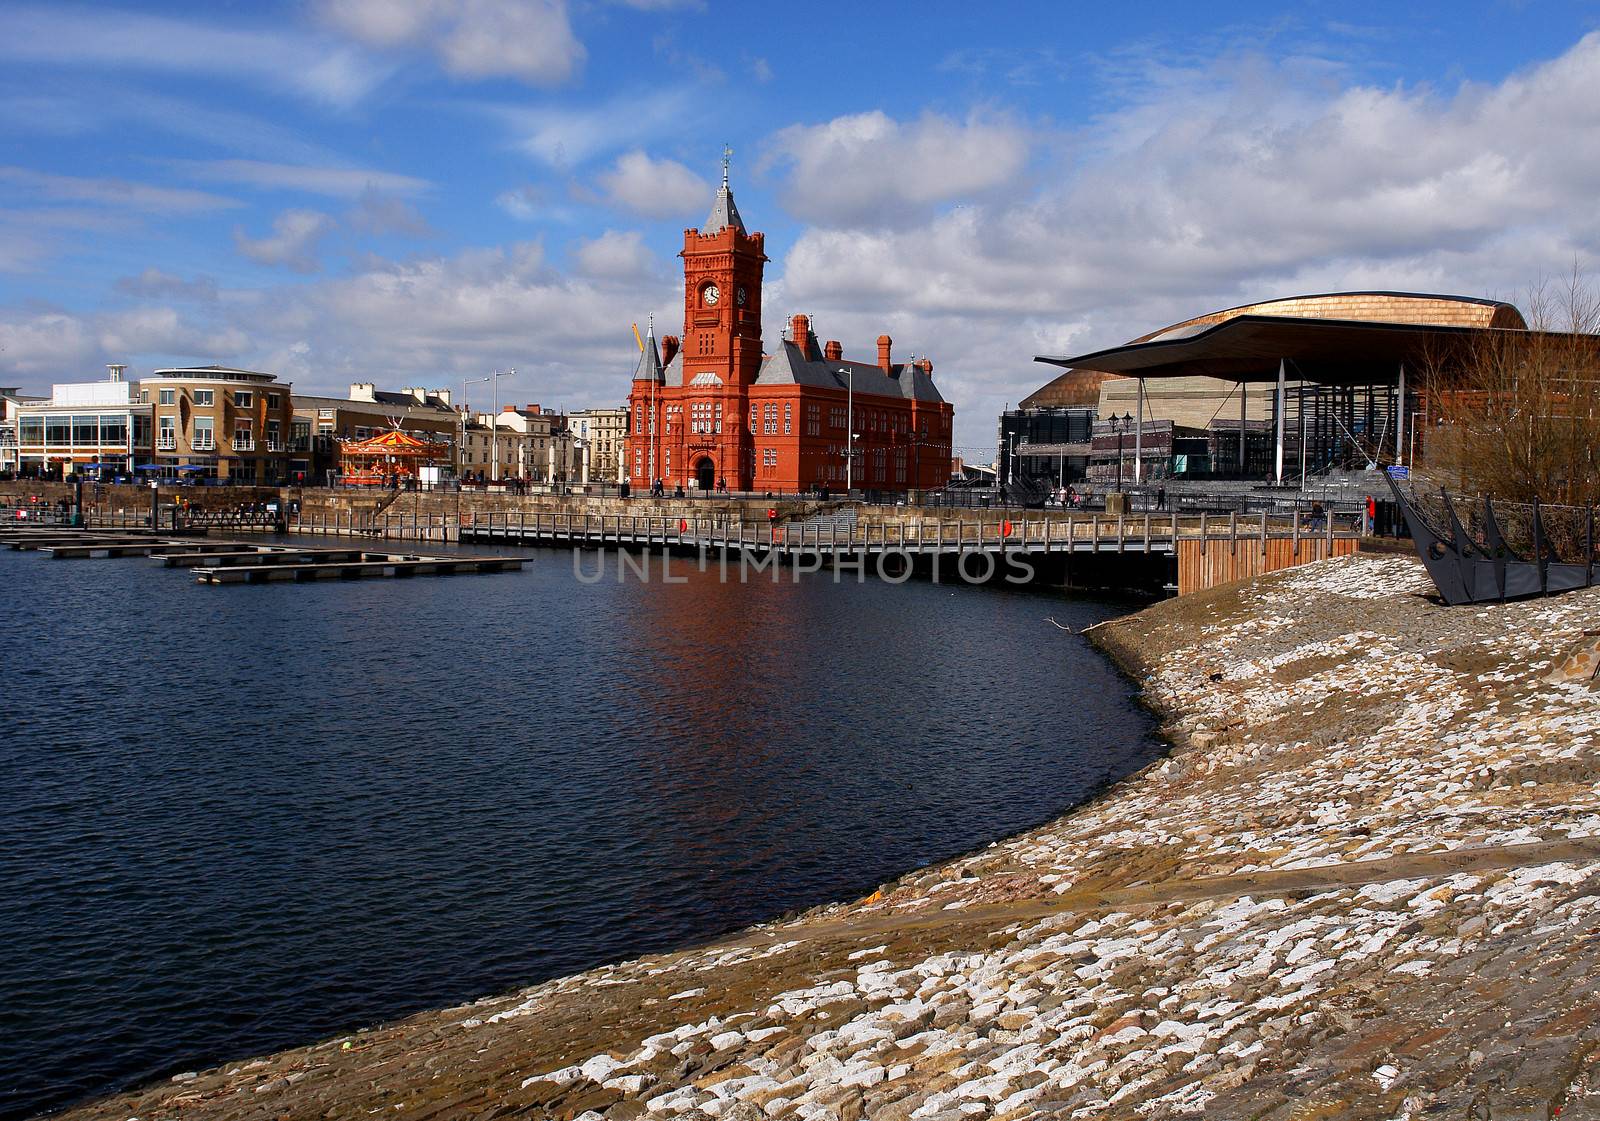 Cardiff bay overview, railway station museum at the center